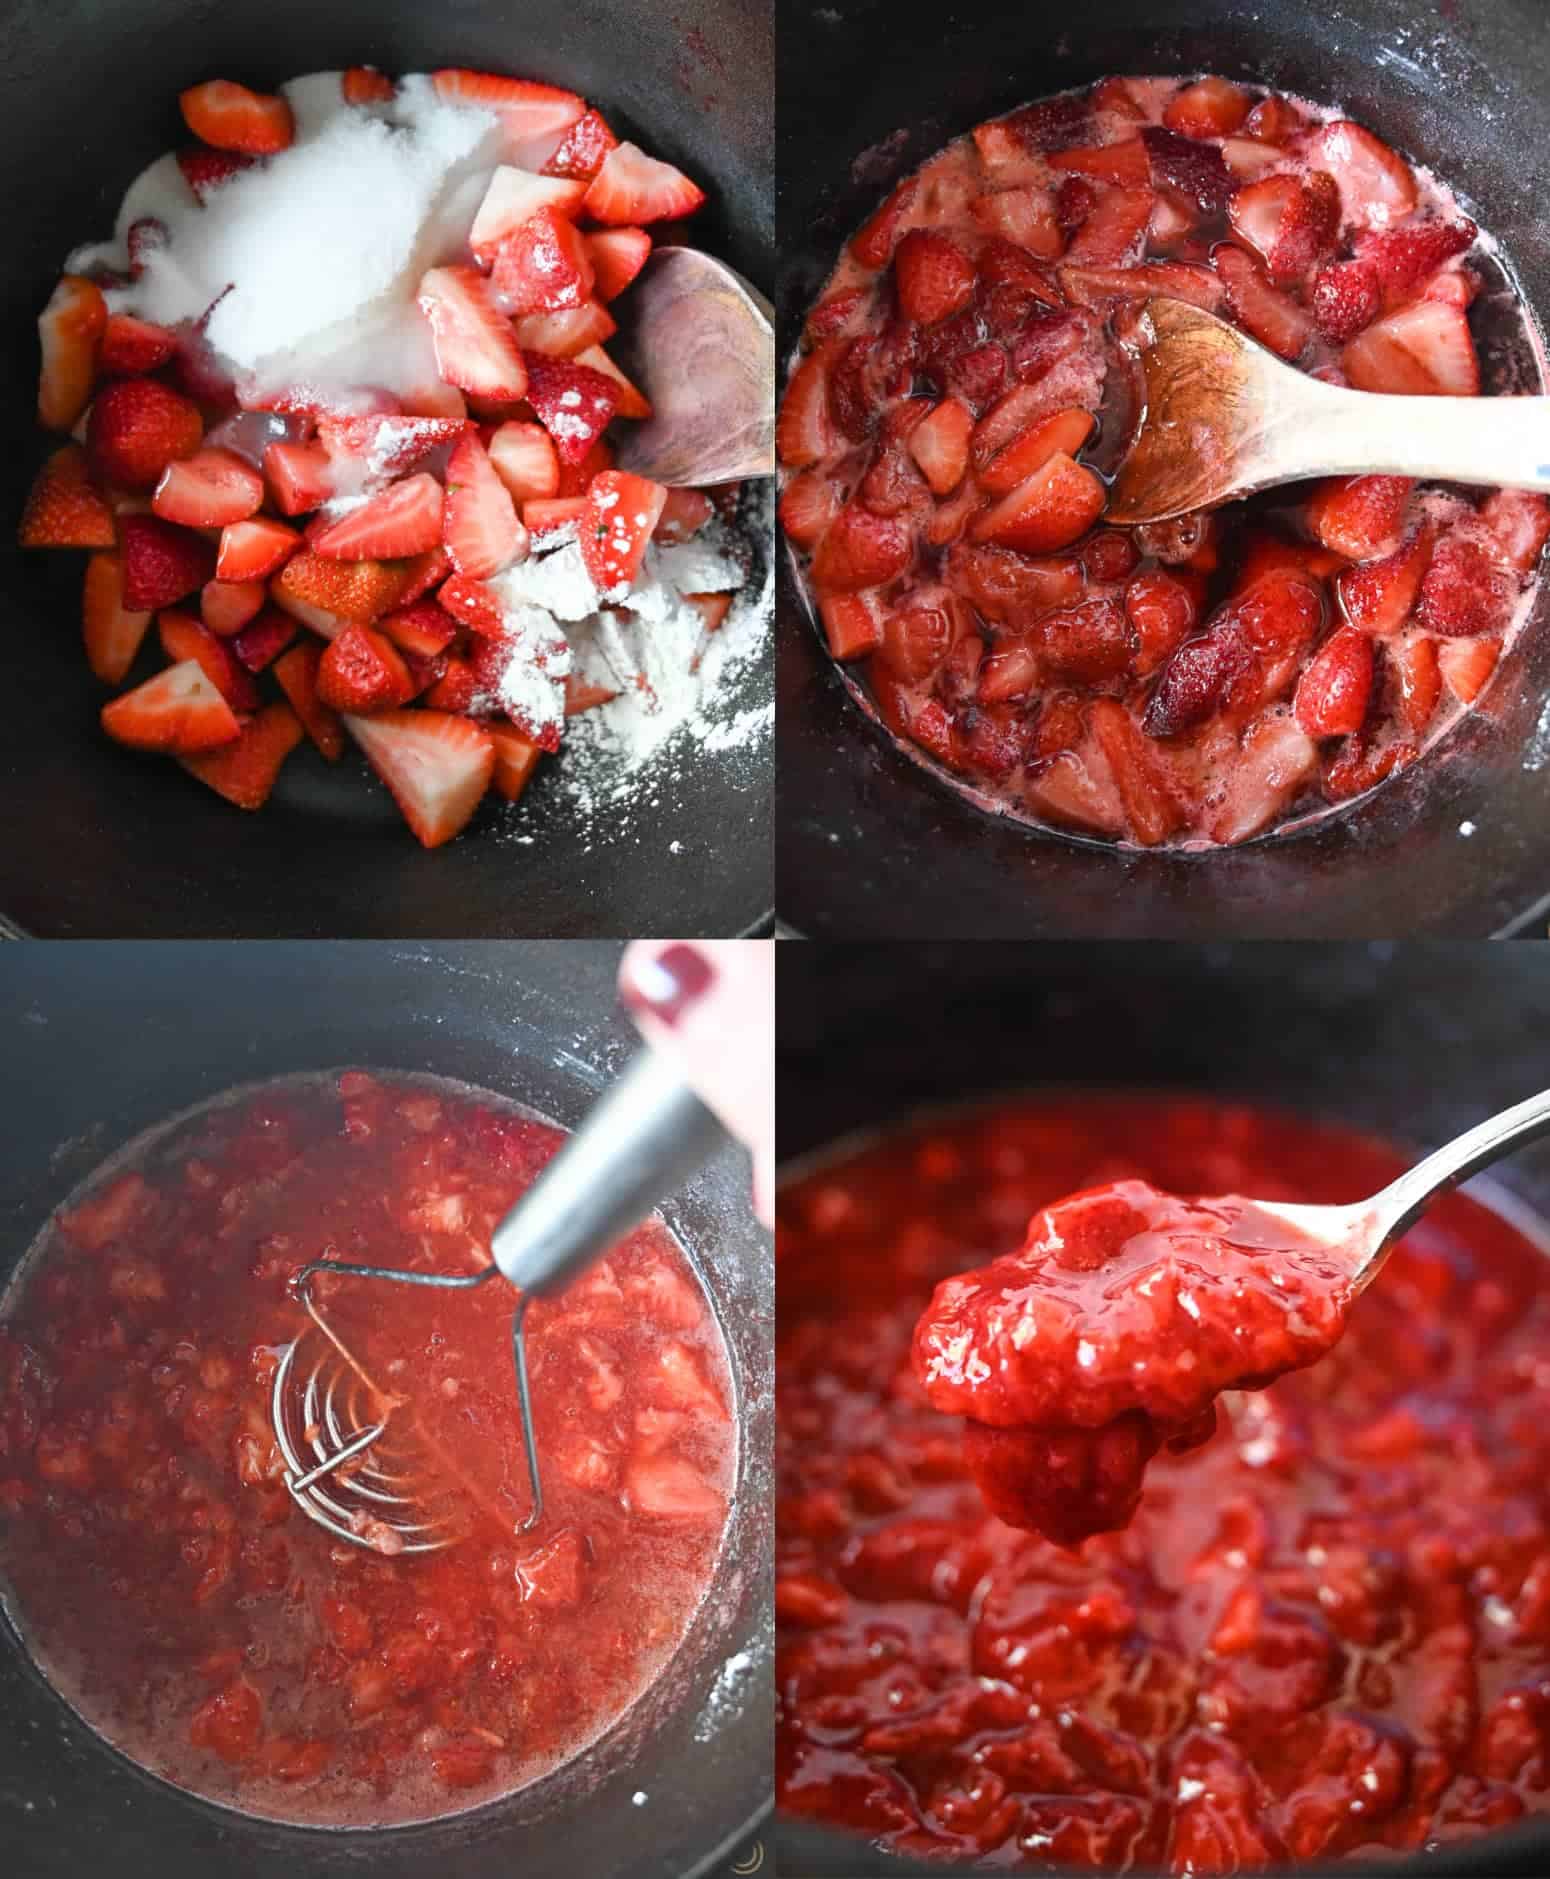 Four process photos. First one, ingredients placed in a large pot. Second one, ingredients have been simmered in the large pot. Third one, a potato masher is mashing the strawberry chunks up. Fourth one, a spoon scooping up some strawberry jam.